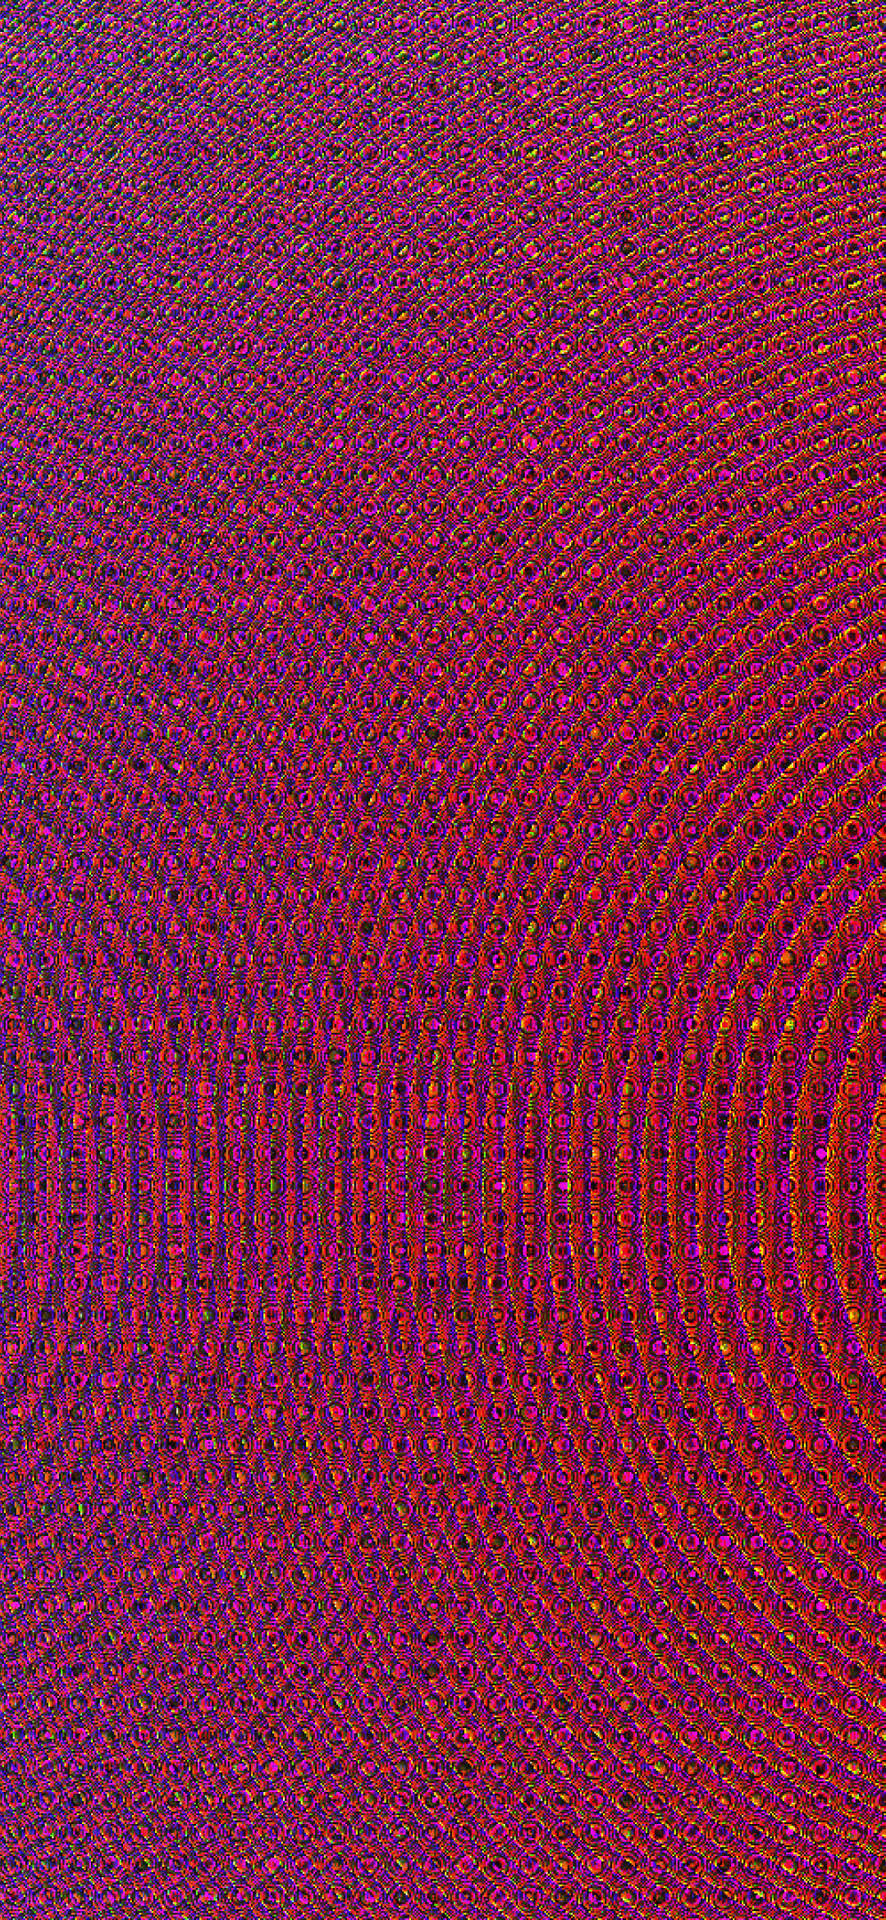 Psychedelic Iphone Abstract Patterns Background